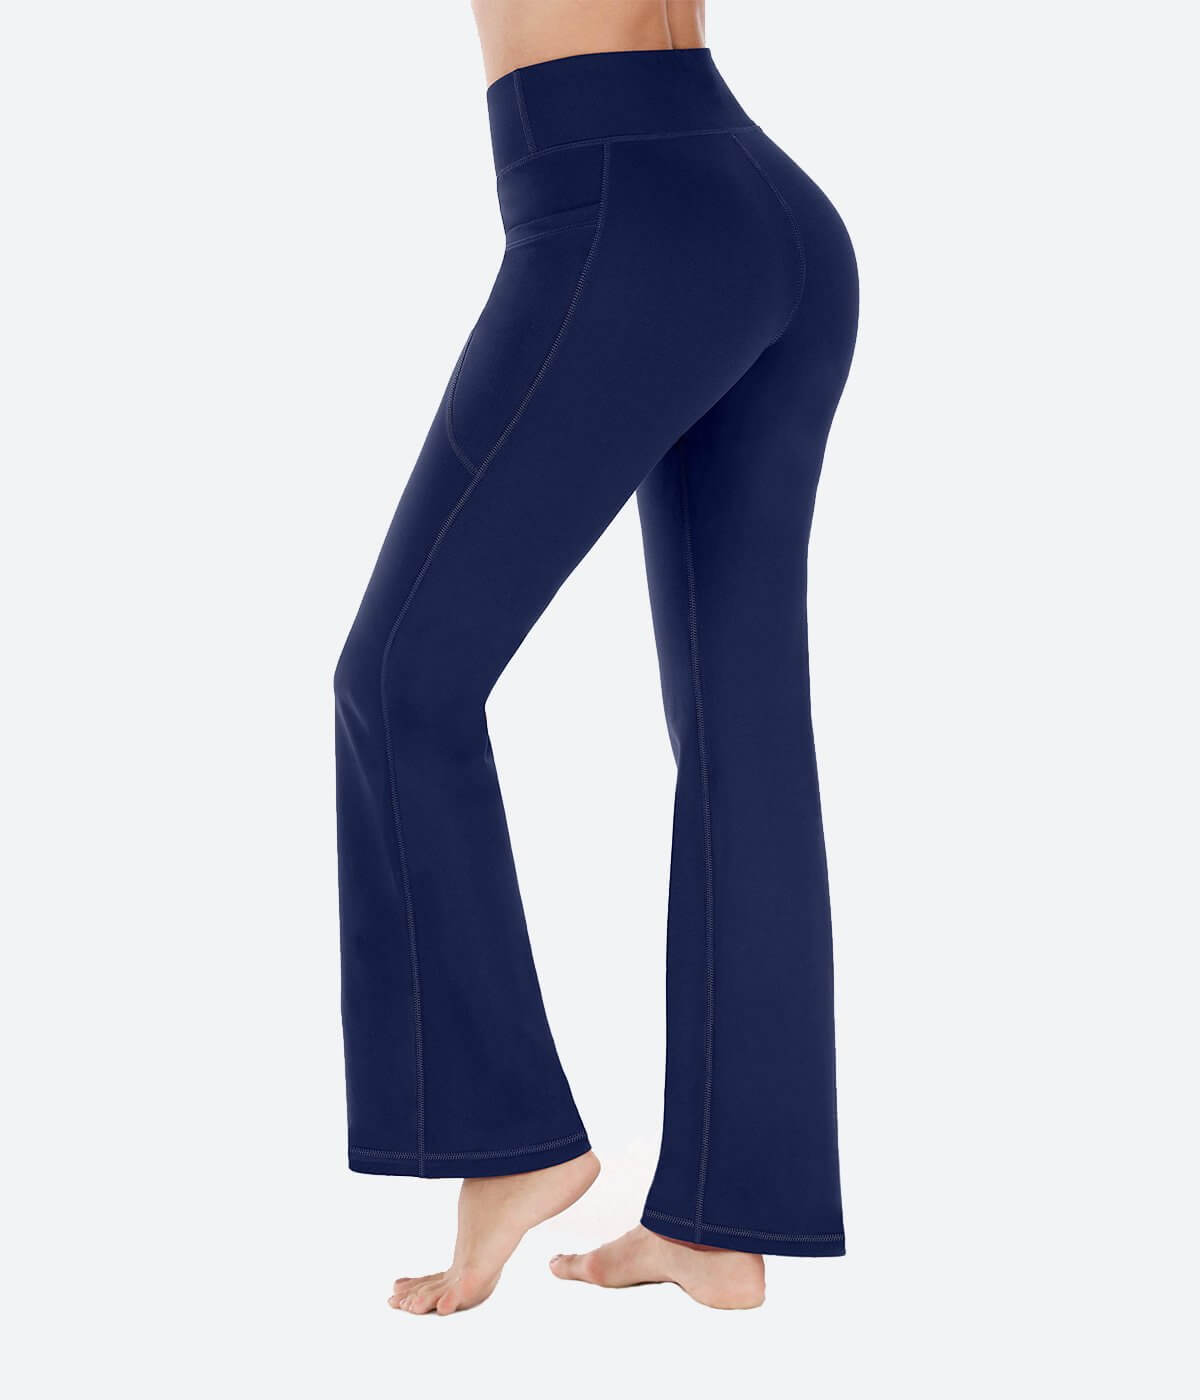 TOWED22 Women's Bootcut Yoga Pants with Pockets, High Waist